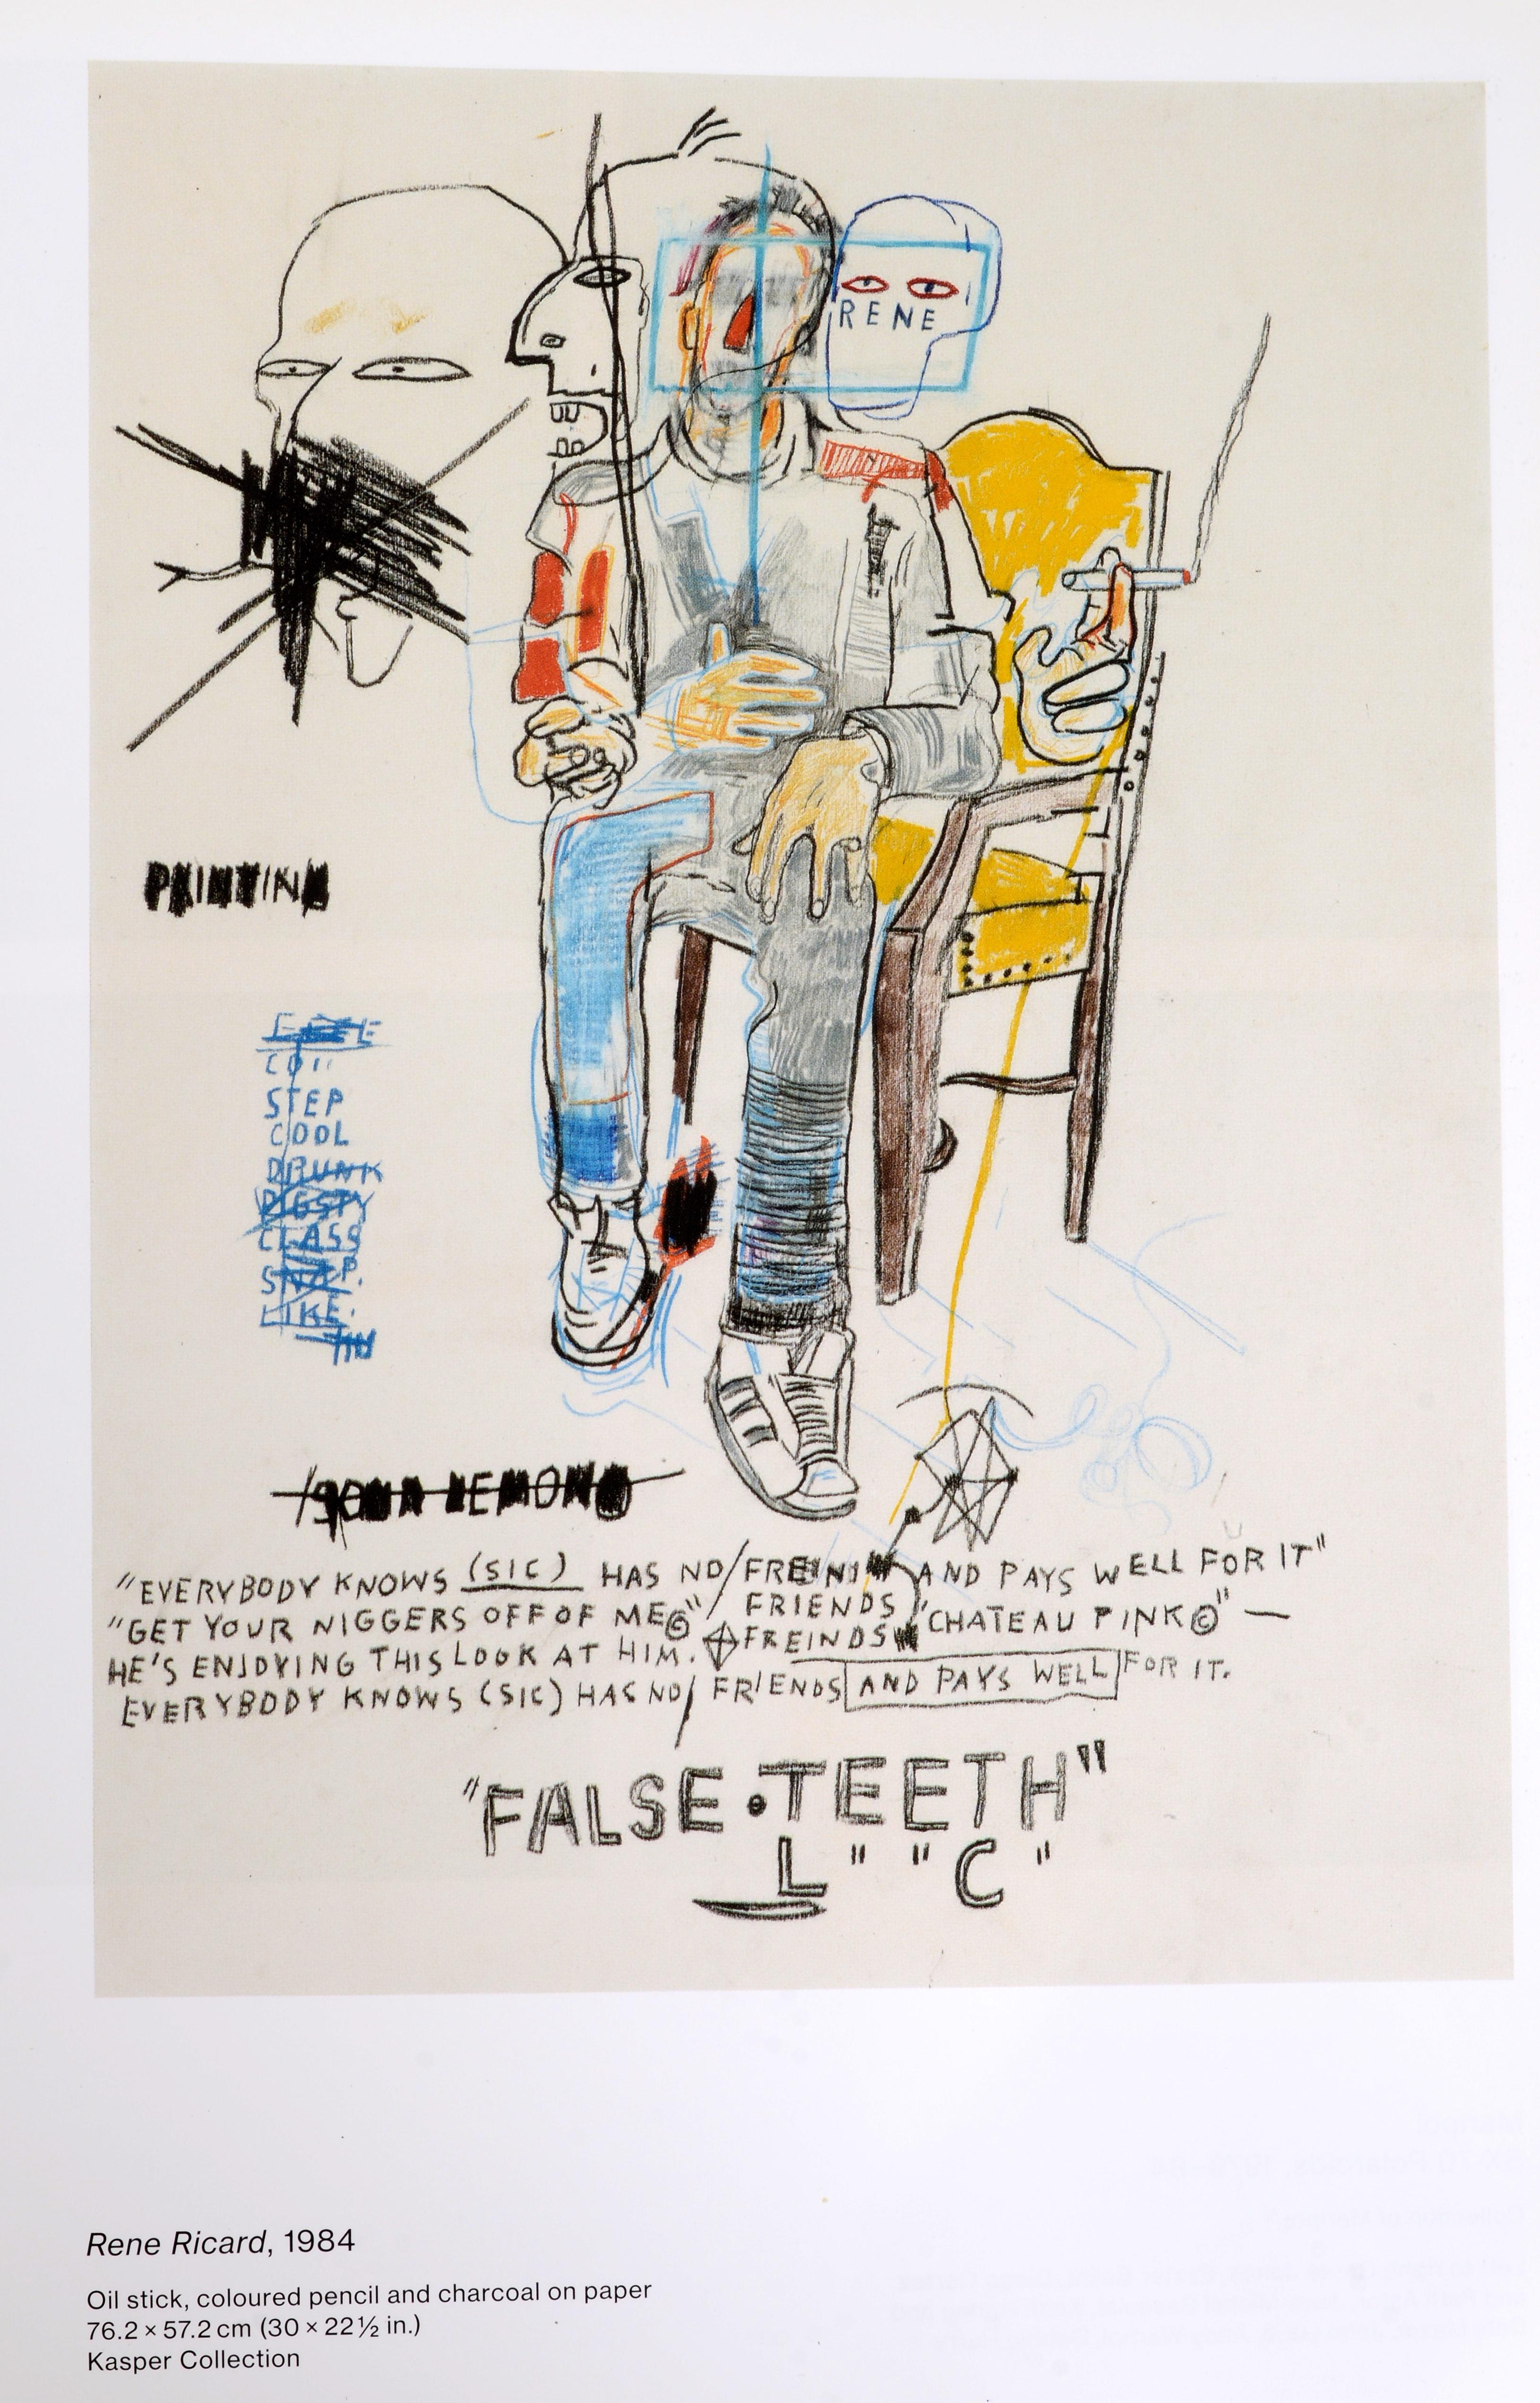 Basquiat: Boom for Real by Eleanor Nairne and Dieter Buchhart. 1st Ed hardcover no dust jacket as issued. Published by Prestel, Munich, 2017, for exhibitions in London and Frankfurt. From the estate of Herbert Kasper, his painting of 